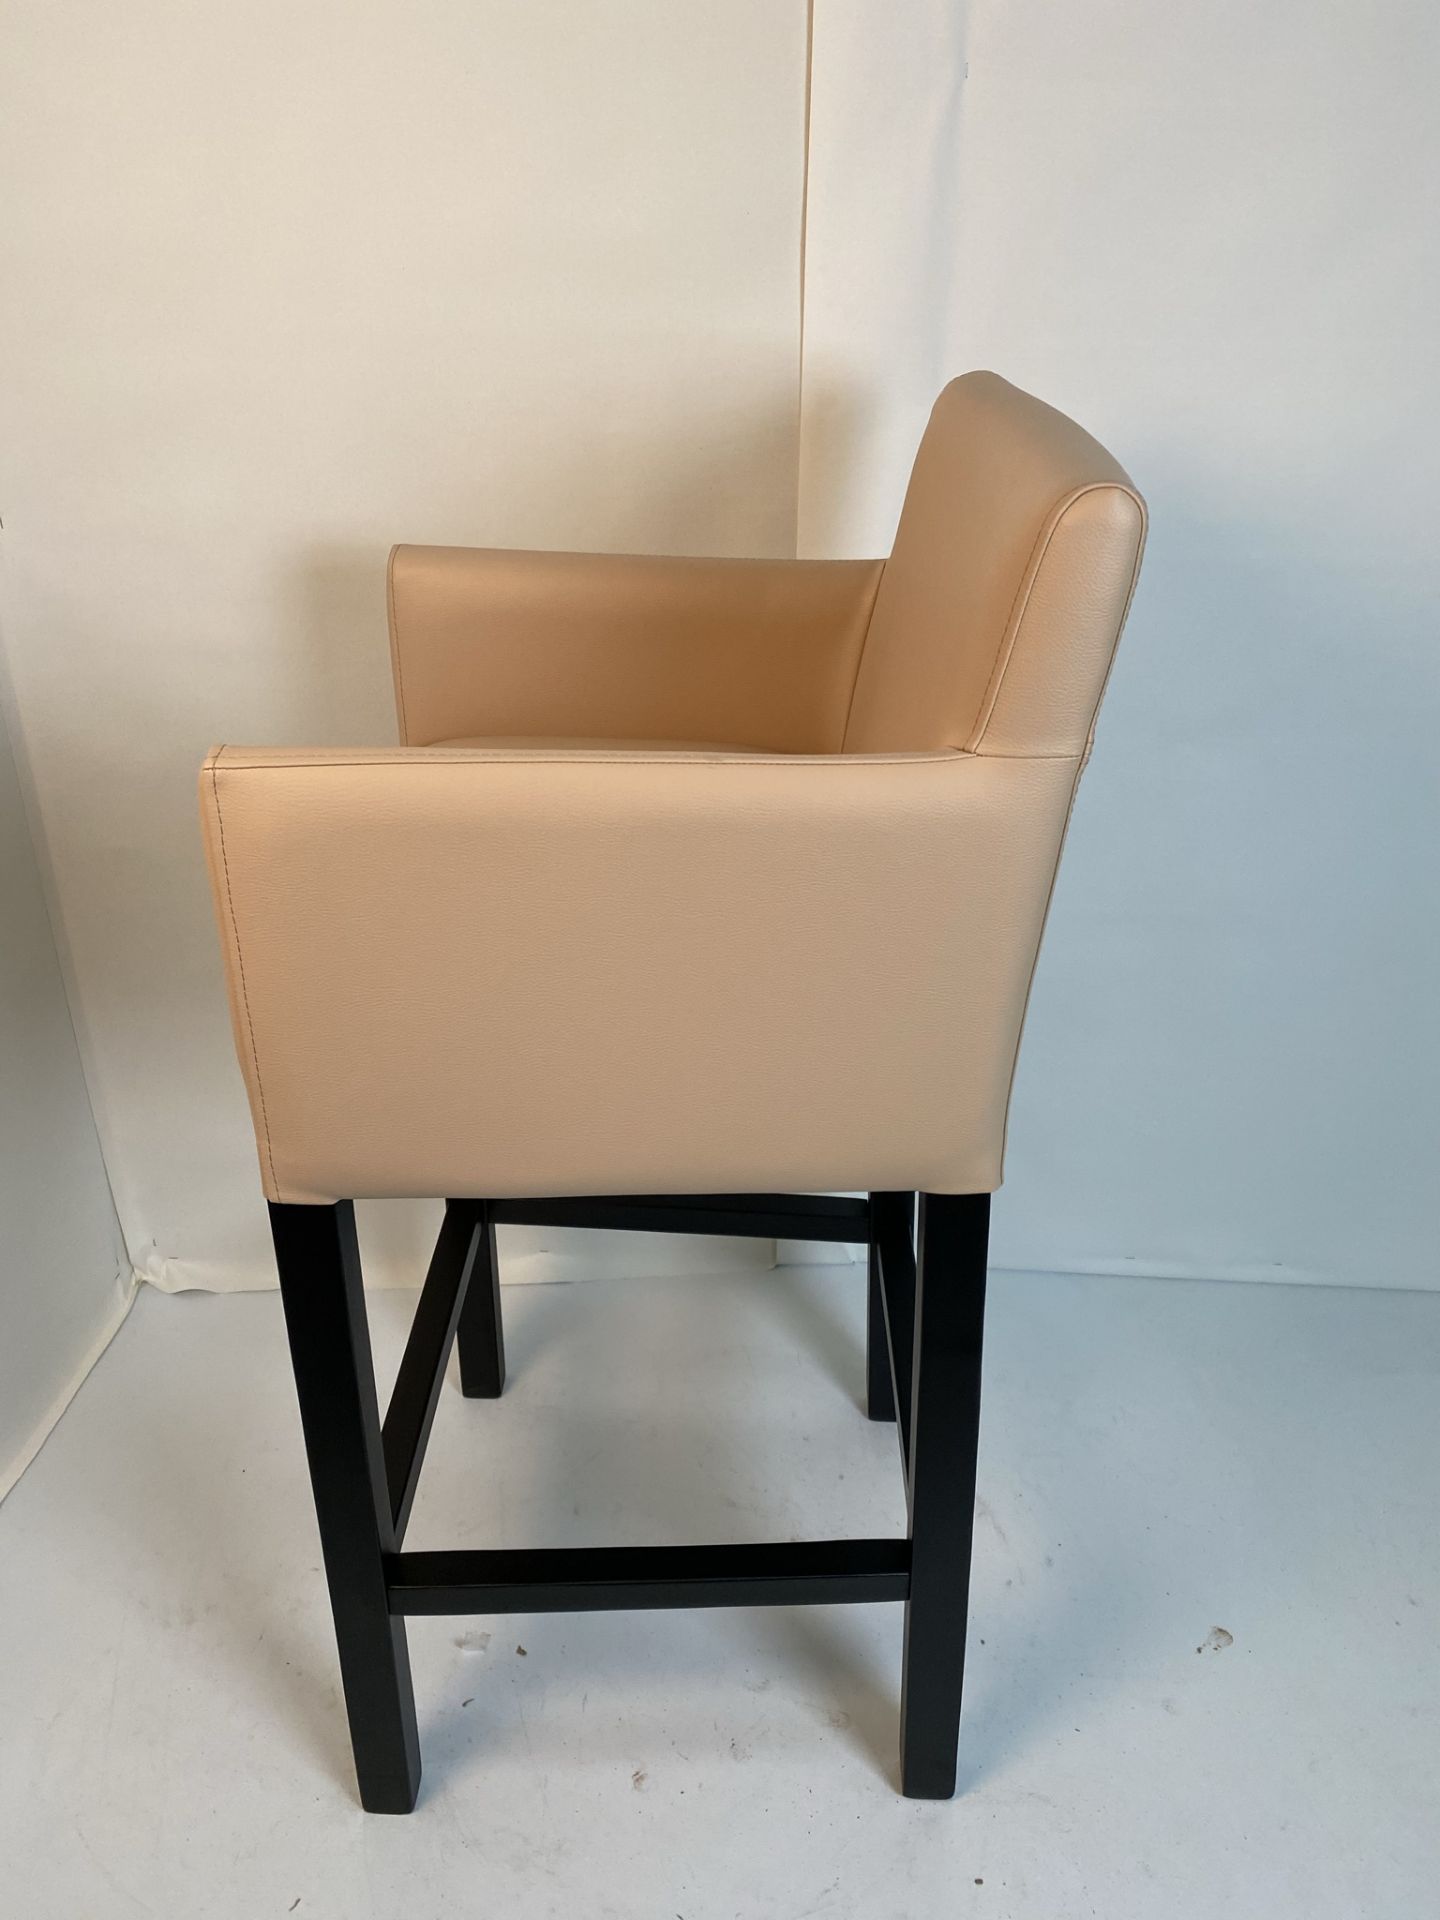 A Vista Vena BE-10 Cappuchino high stool with black wood frame - Image 3 of 8